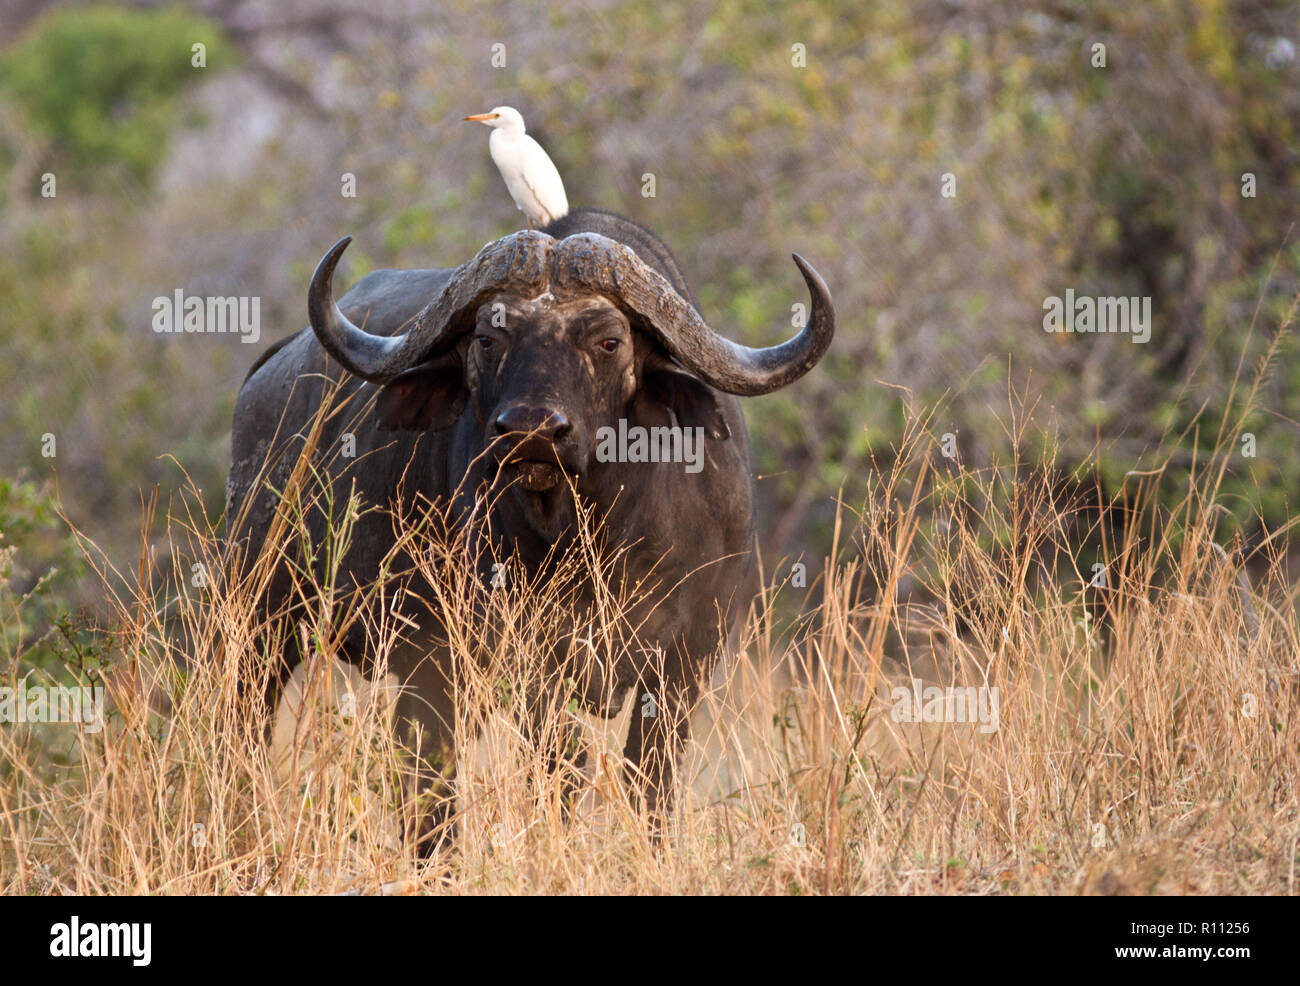 A wary old buffalo bull stares at the vehicle as a cattle Egret hitches a ride on his back ever alert for insects being flushed up by their movement. Stock Photo